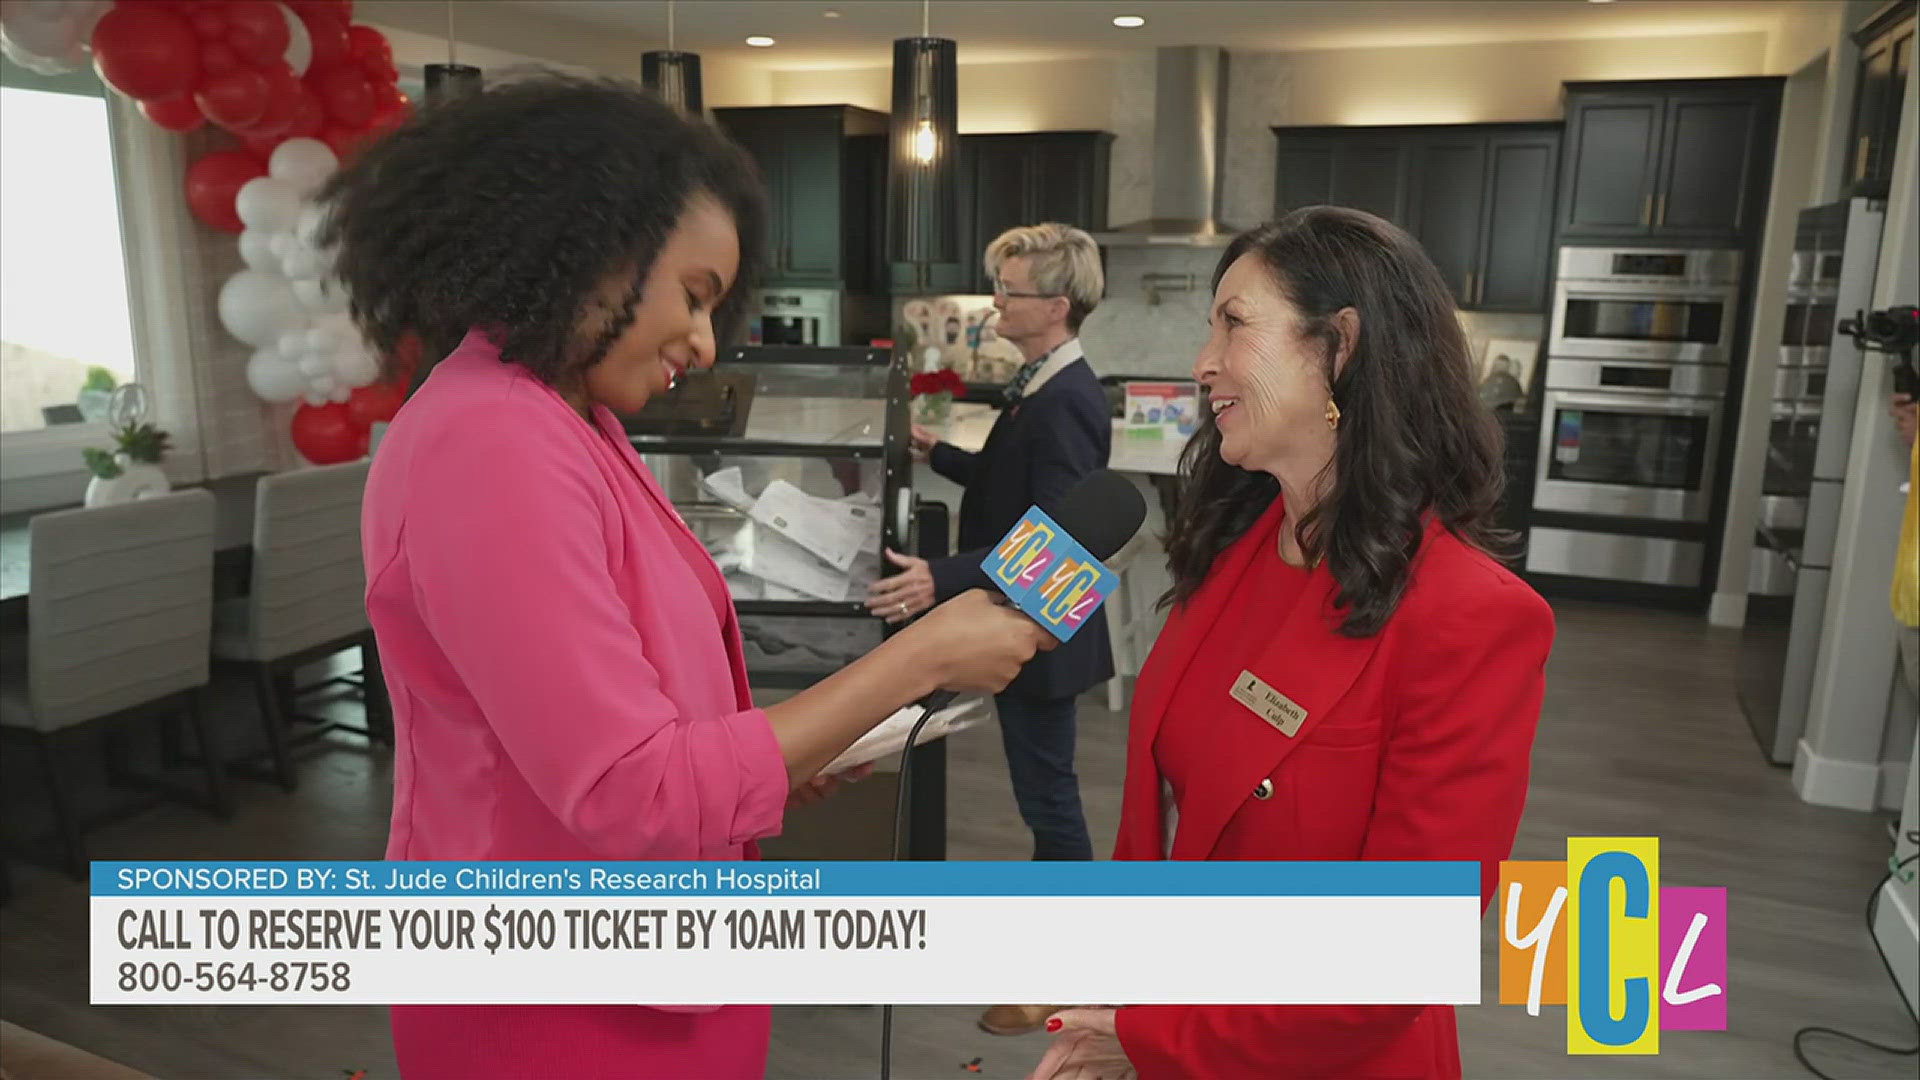 Watch as we find out who won the American Airlines advantage miles worth $5,000. Sponsored by St. Jude Children's Research Hospital.